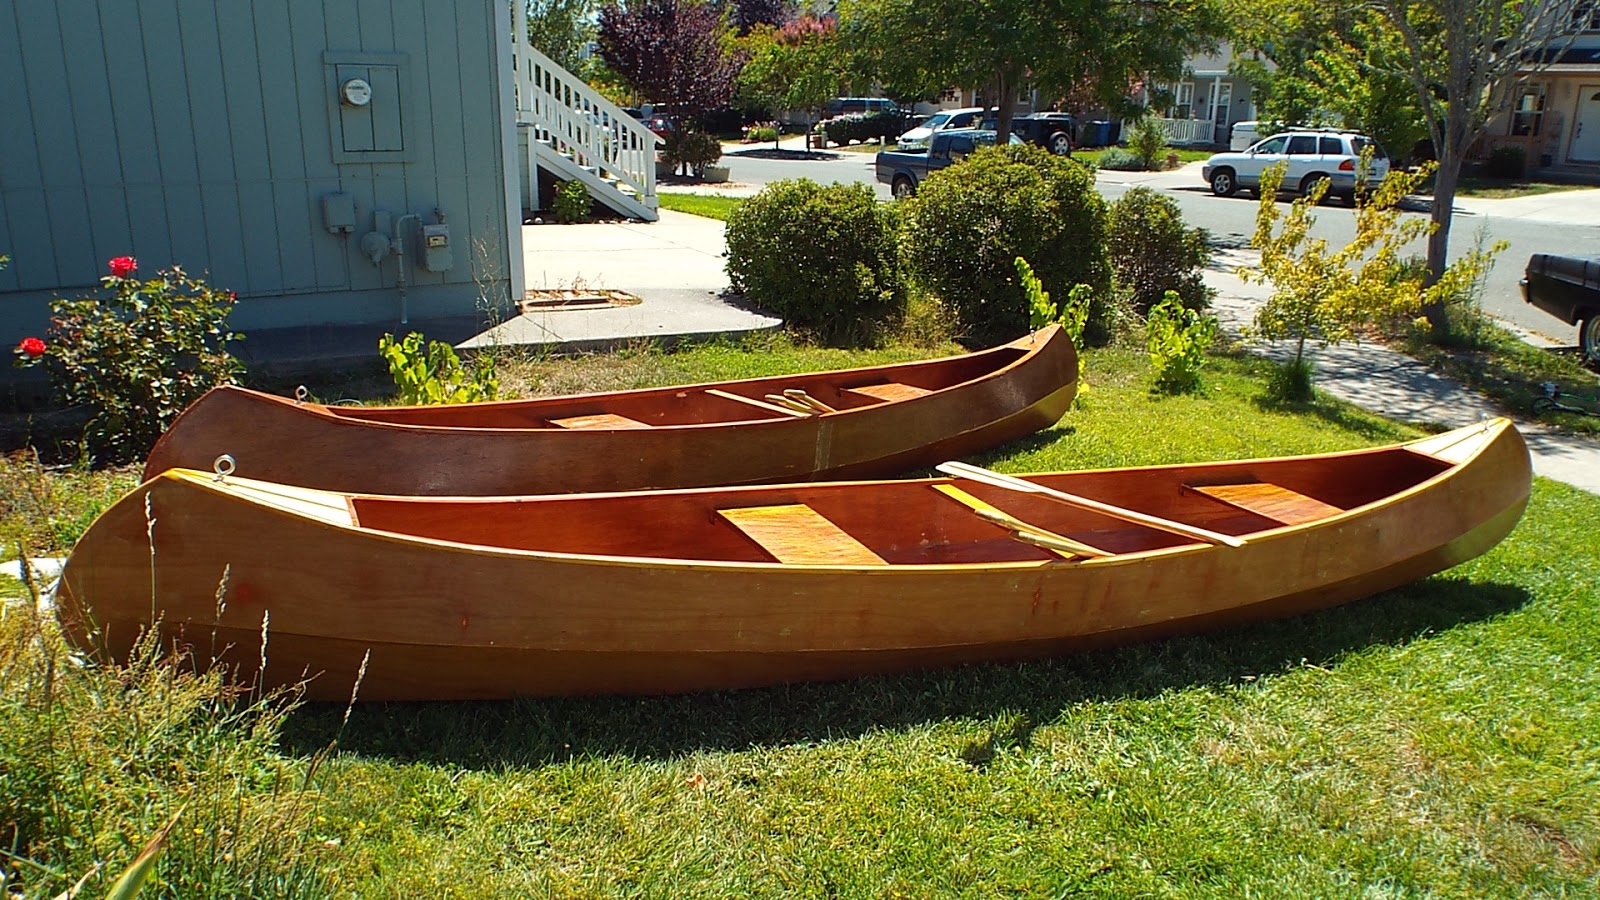 The author's first homemade canoes. The design is "Wren" by Selway 